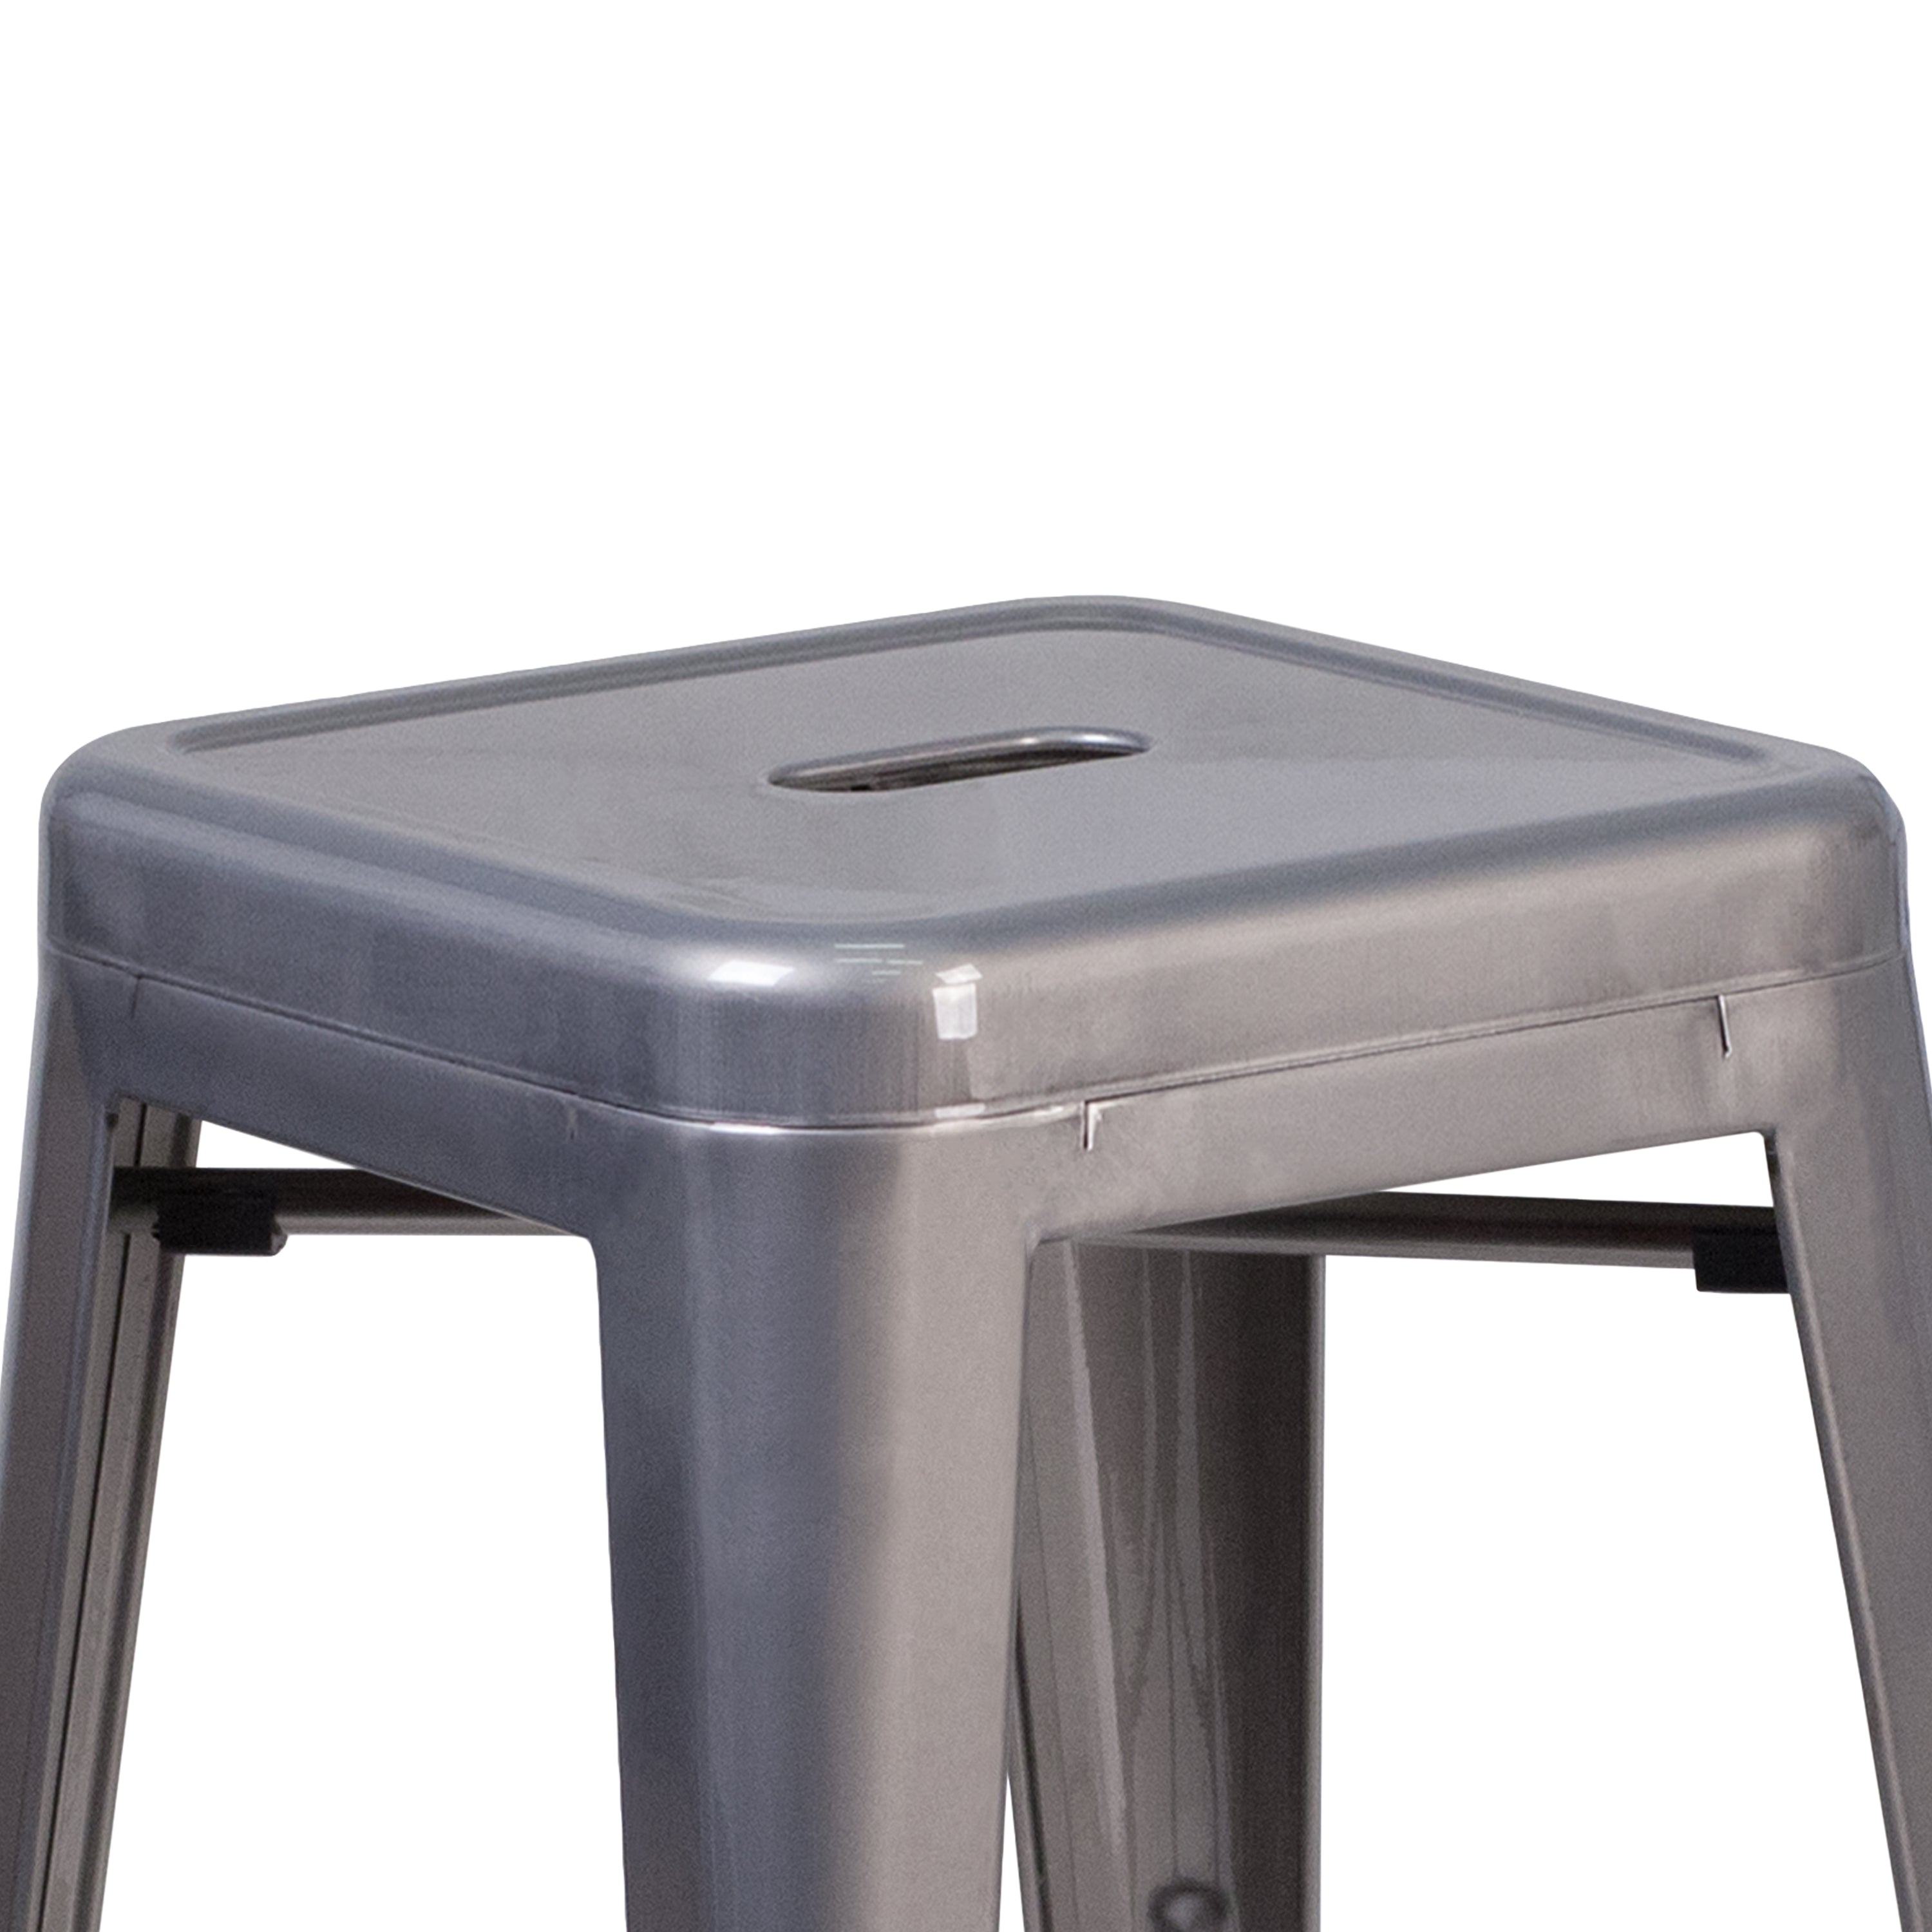 24'' High Backless Metal Indoor Counter Height Stool with Square Seat-Metal Colorful Restaurant Counter Stool-Flash Furniture-Wall2Wall Furnishings